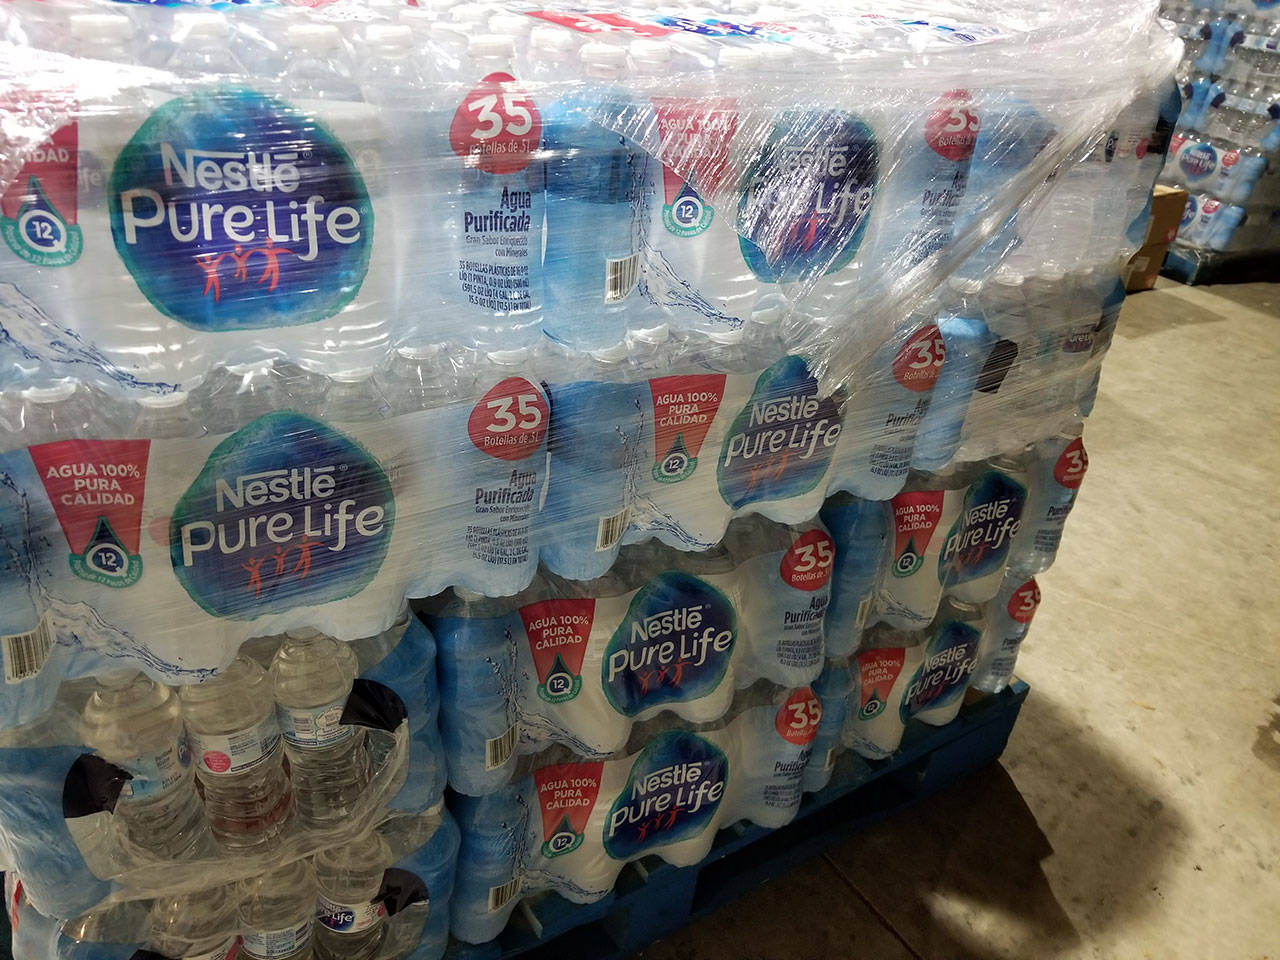 The Snoqualmie Tribe has donated bottled water for North Bend homes to use while they were under the no drink order. Sallal offered to deliver the water to affected households. Photo courtesy of Sallal Water Association